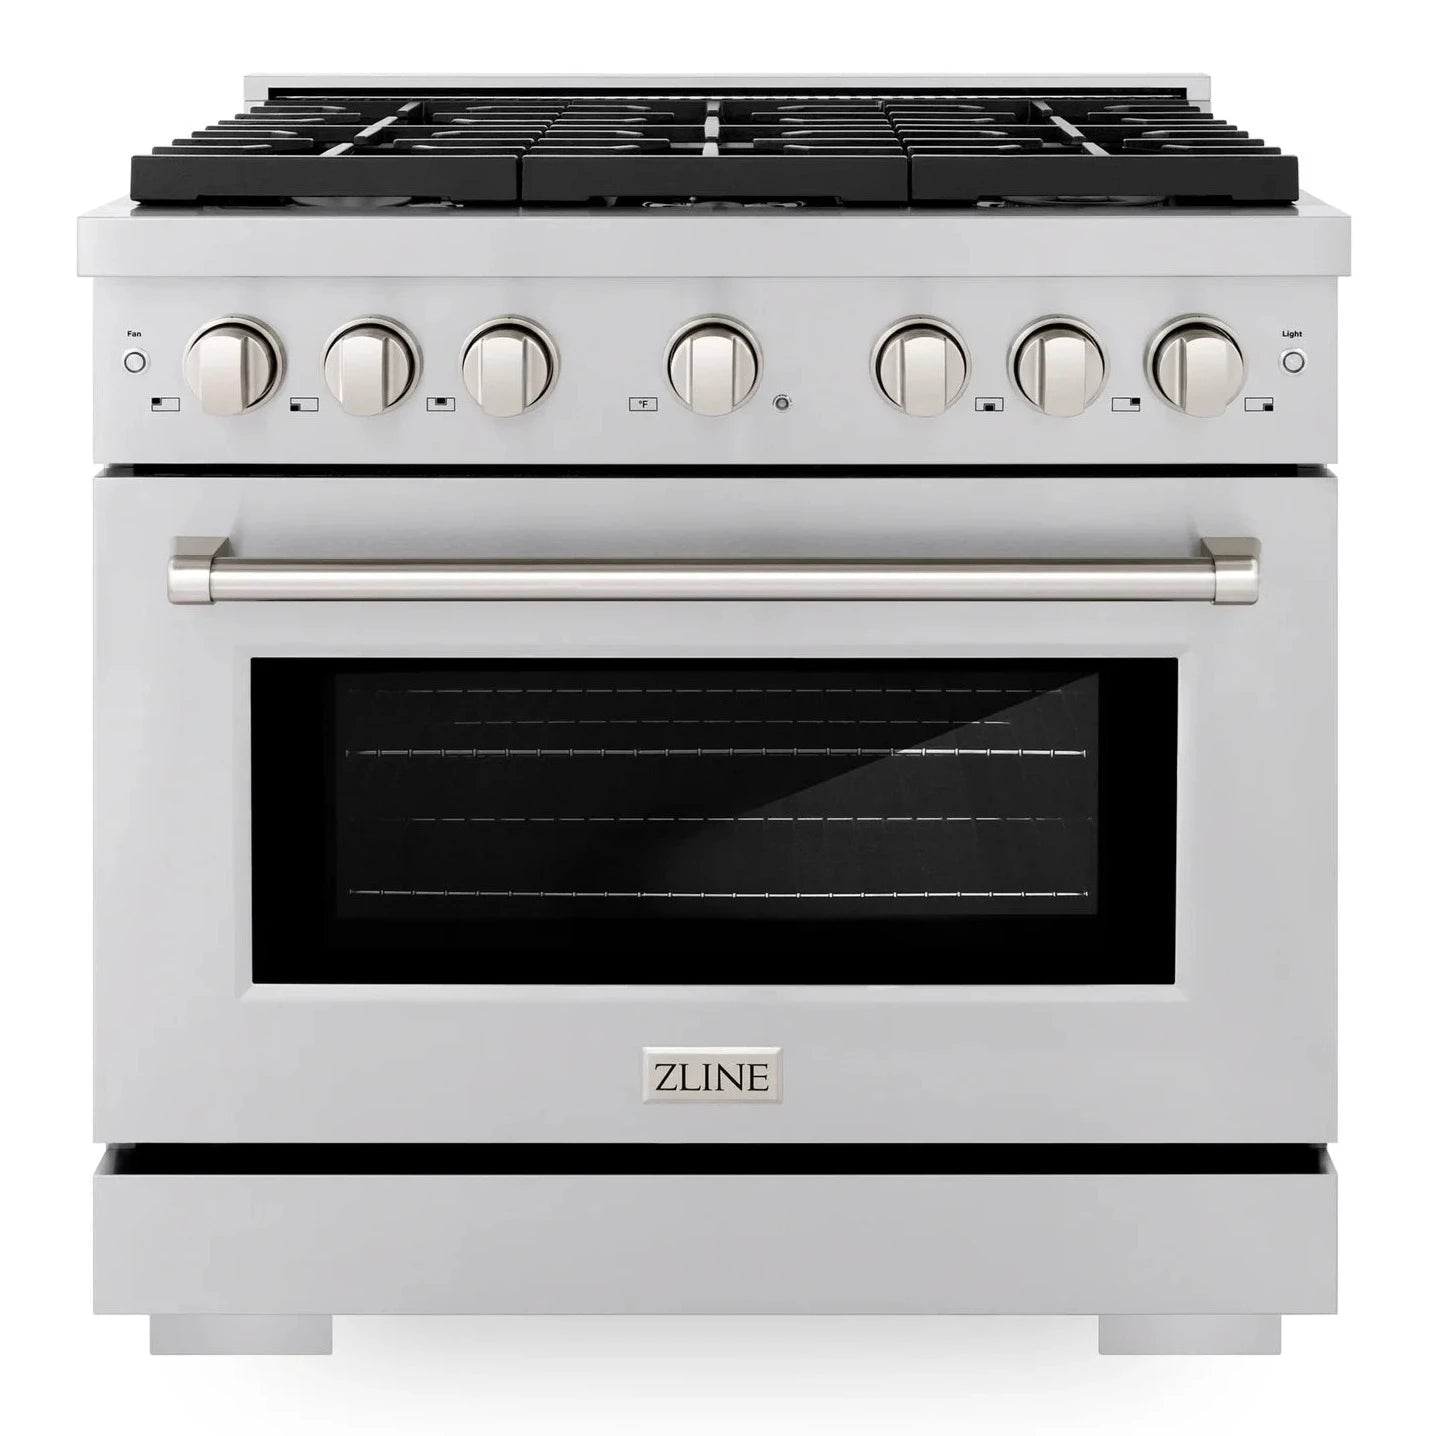 ZLINE 36" Professional Gas Range with Convection Oven and 6 Burners in Stainless Steel-SGR36